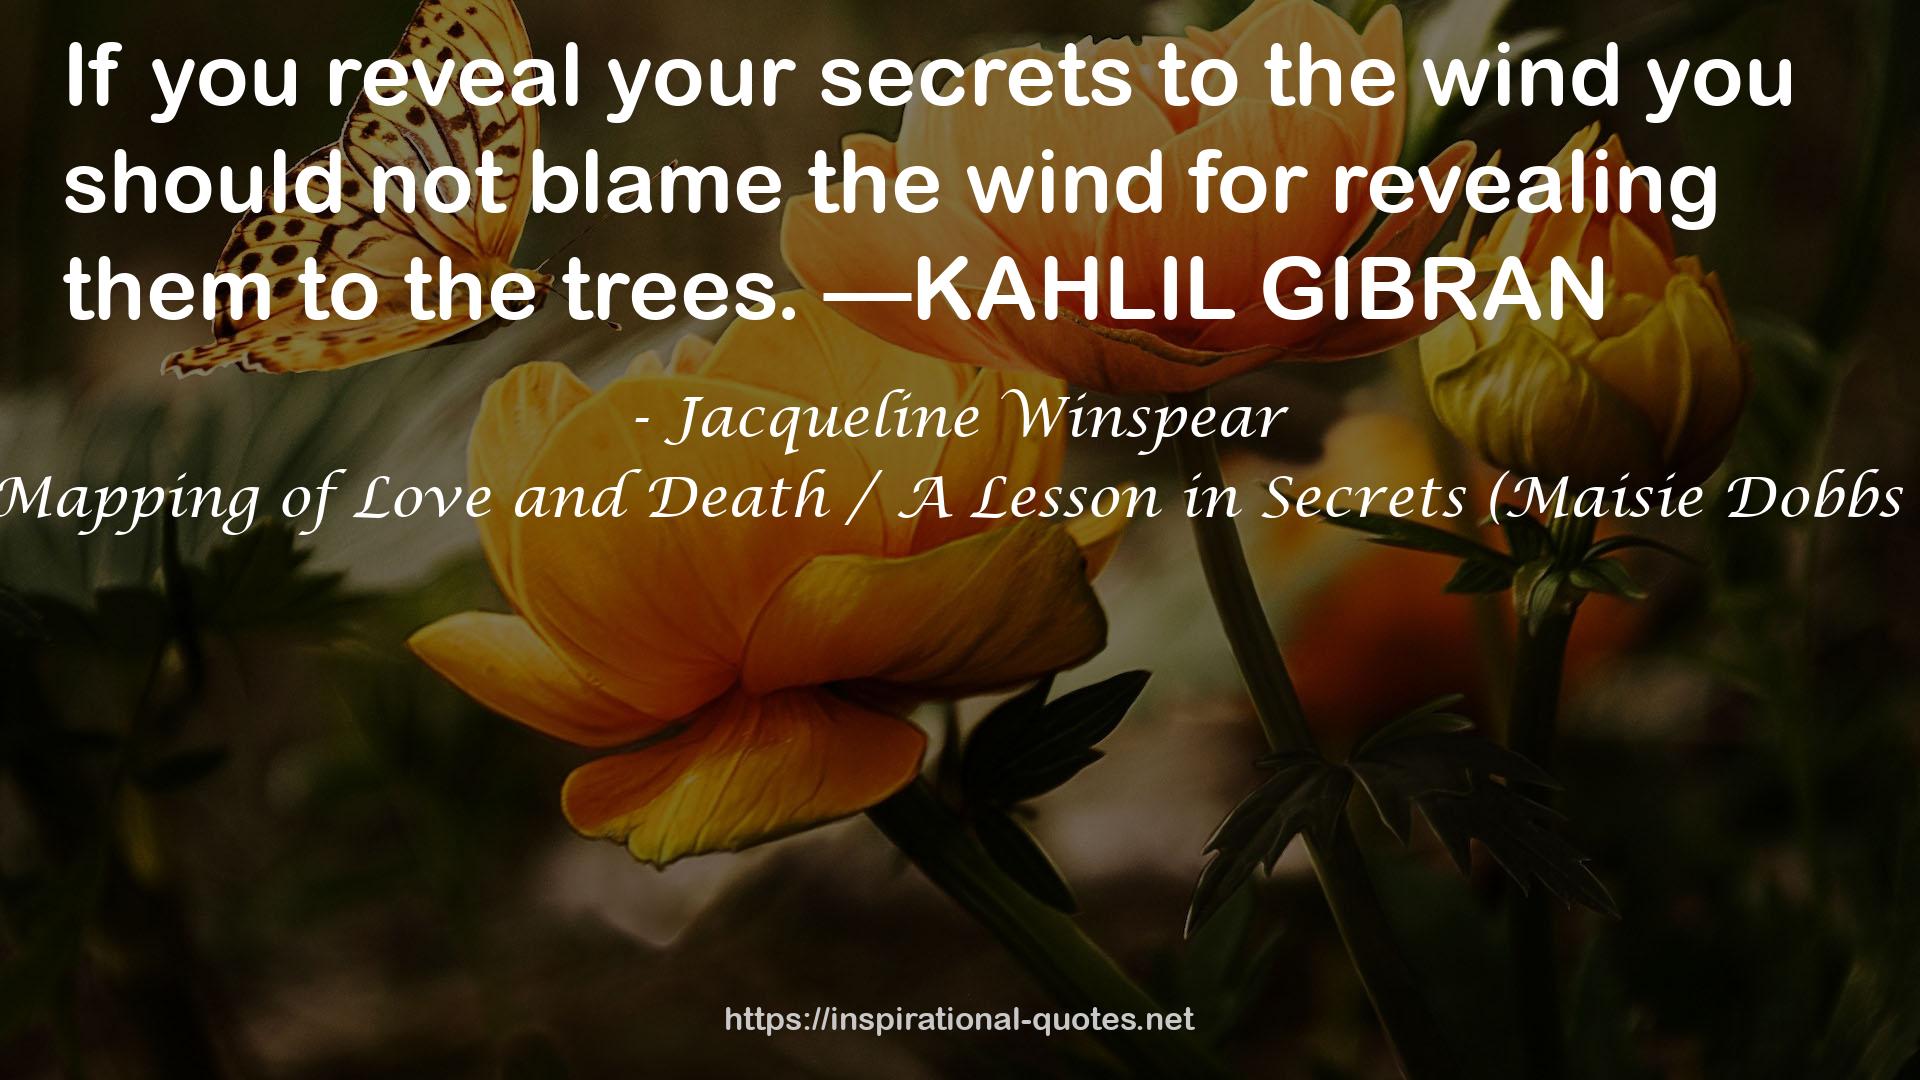 The Mapping of Love and Death / A Lesson in Secrets (Maisie Dobbs #7-8) QUOTES